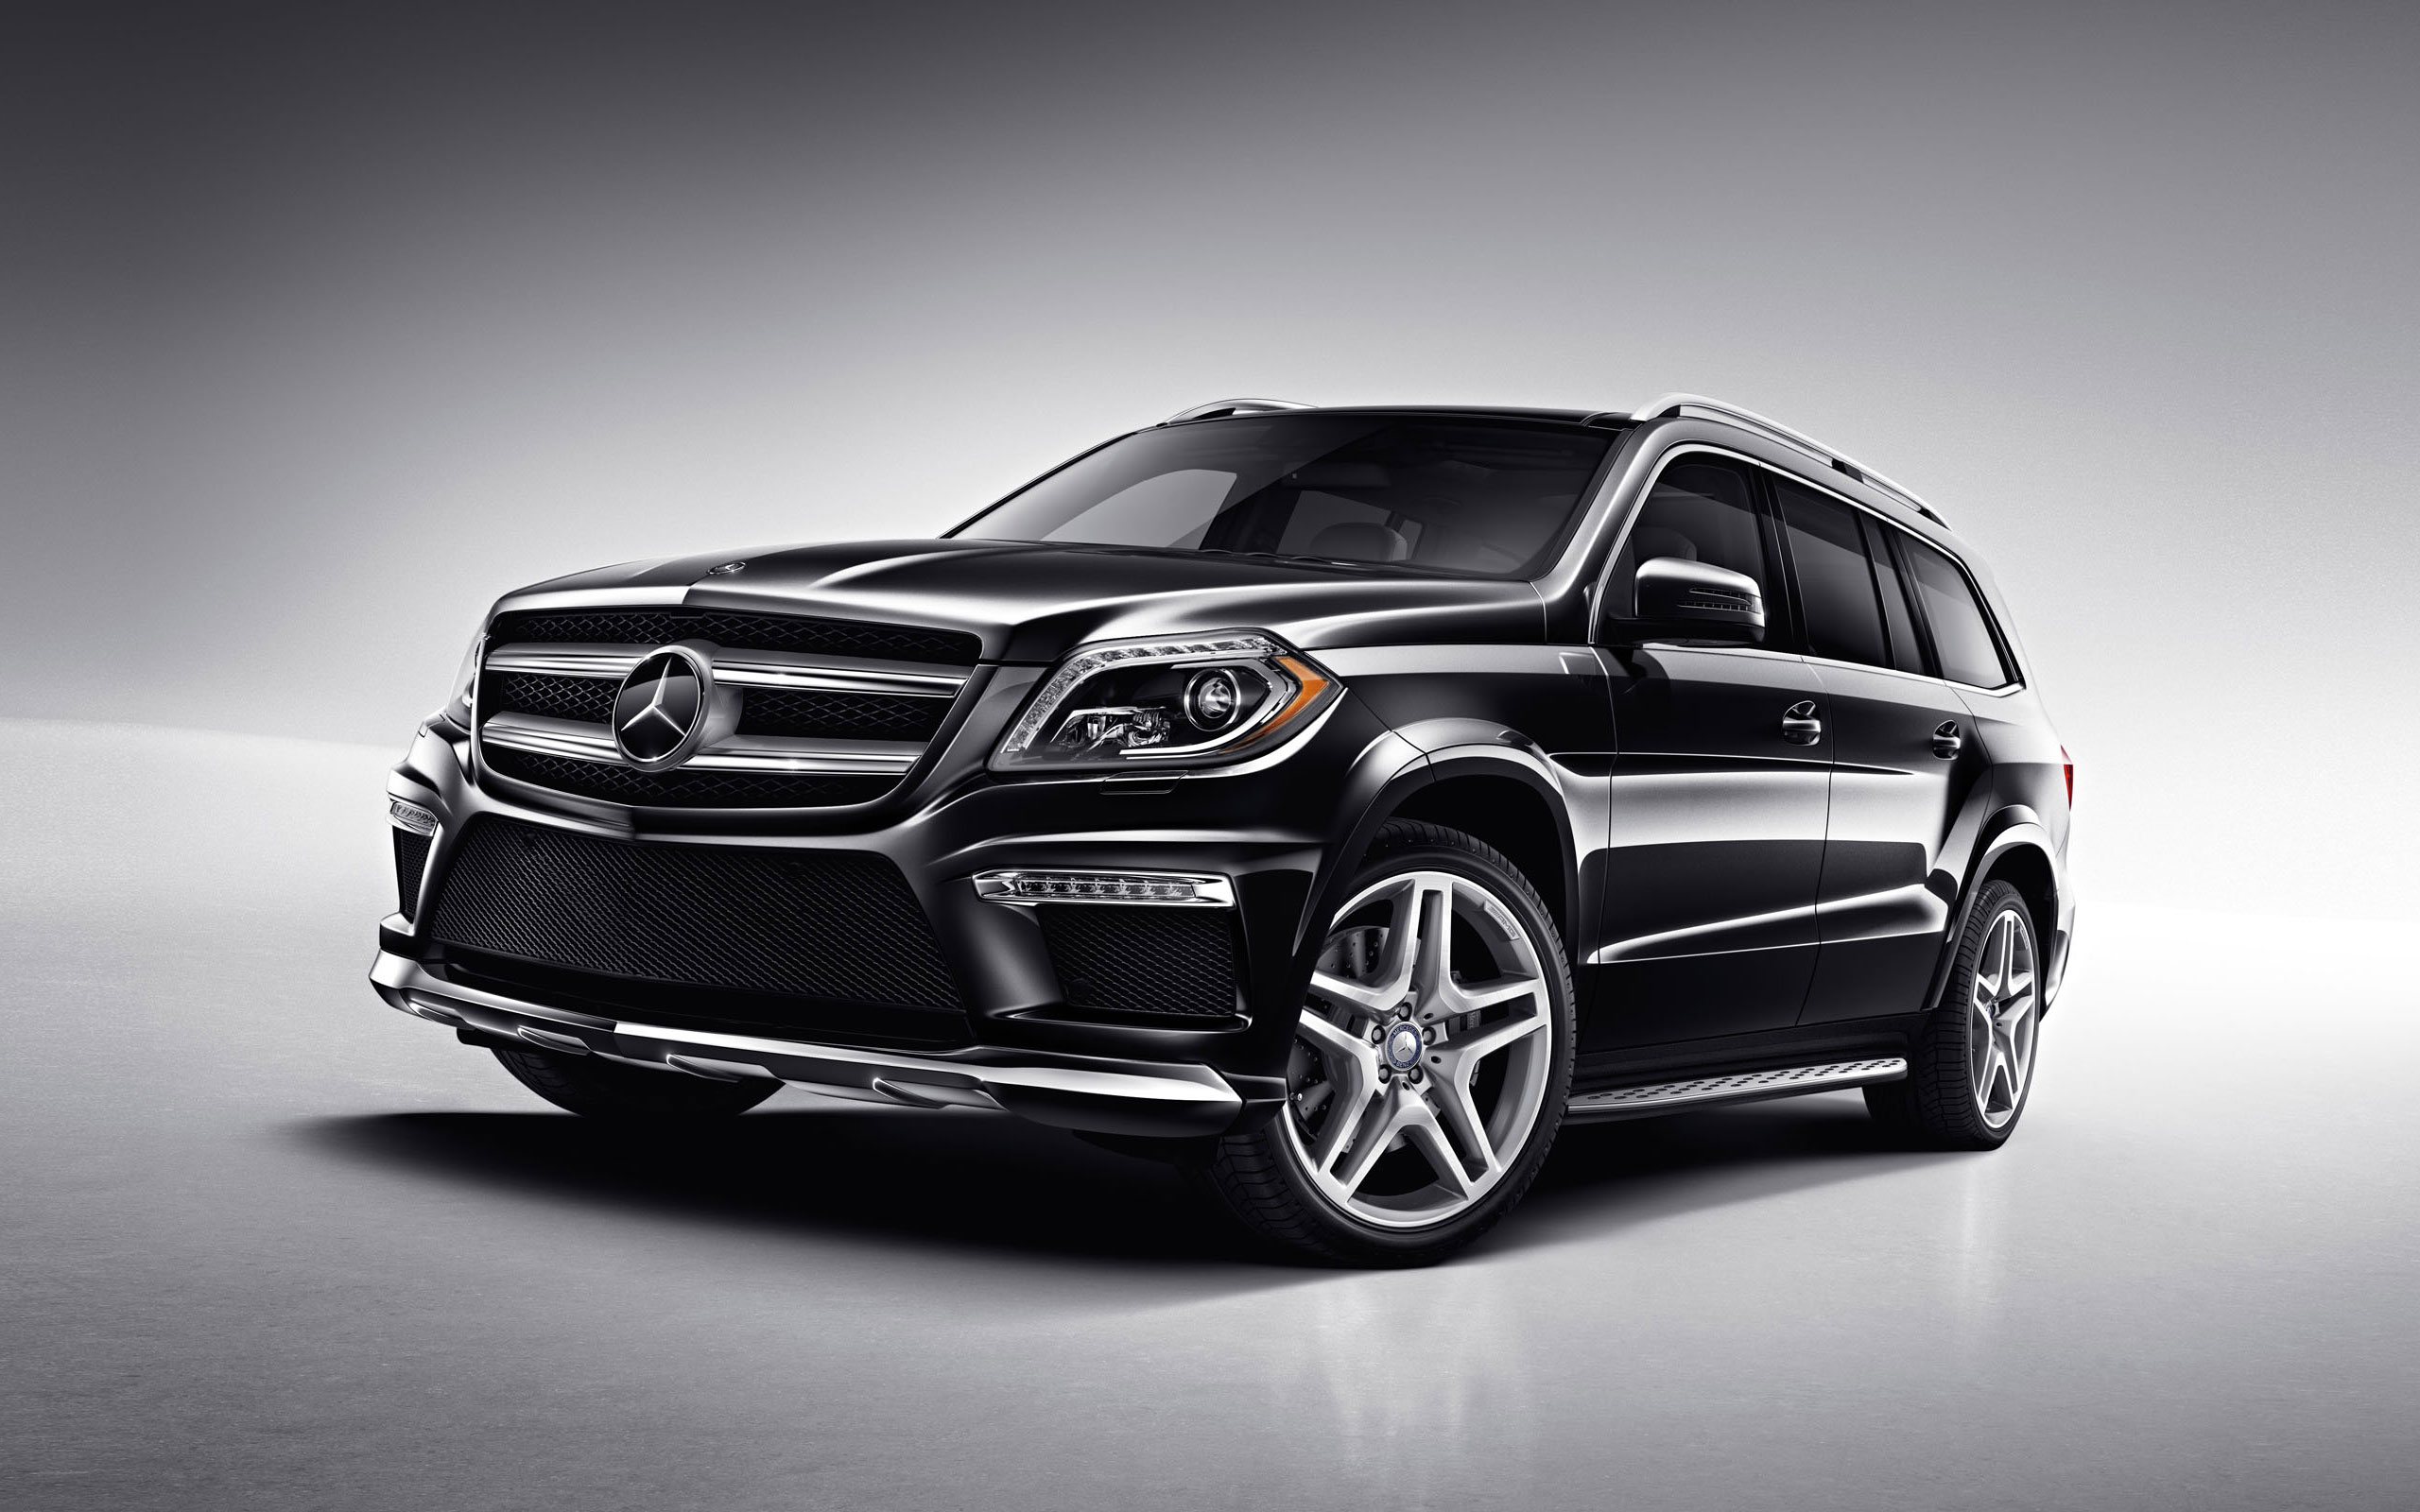 Awesome Mercedes Benz Gl Class Wallpaper Full HD Pictures